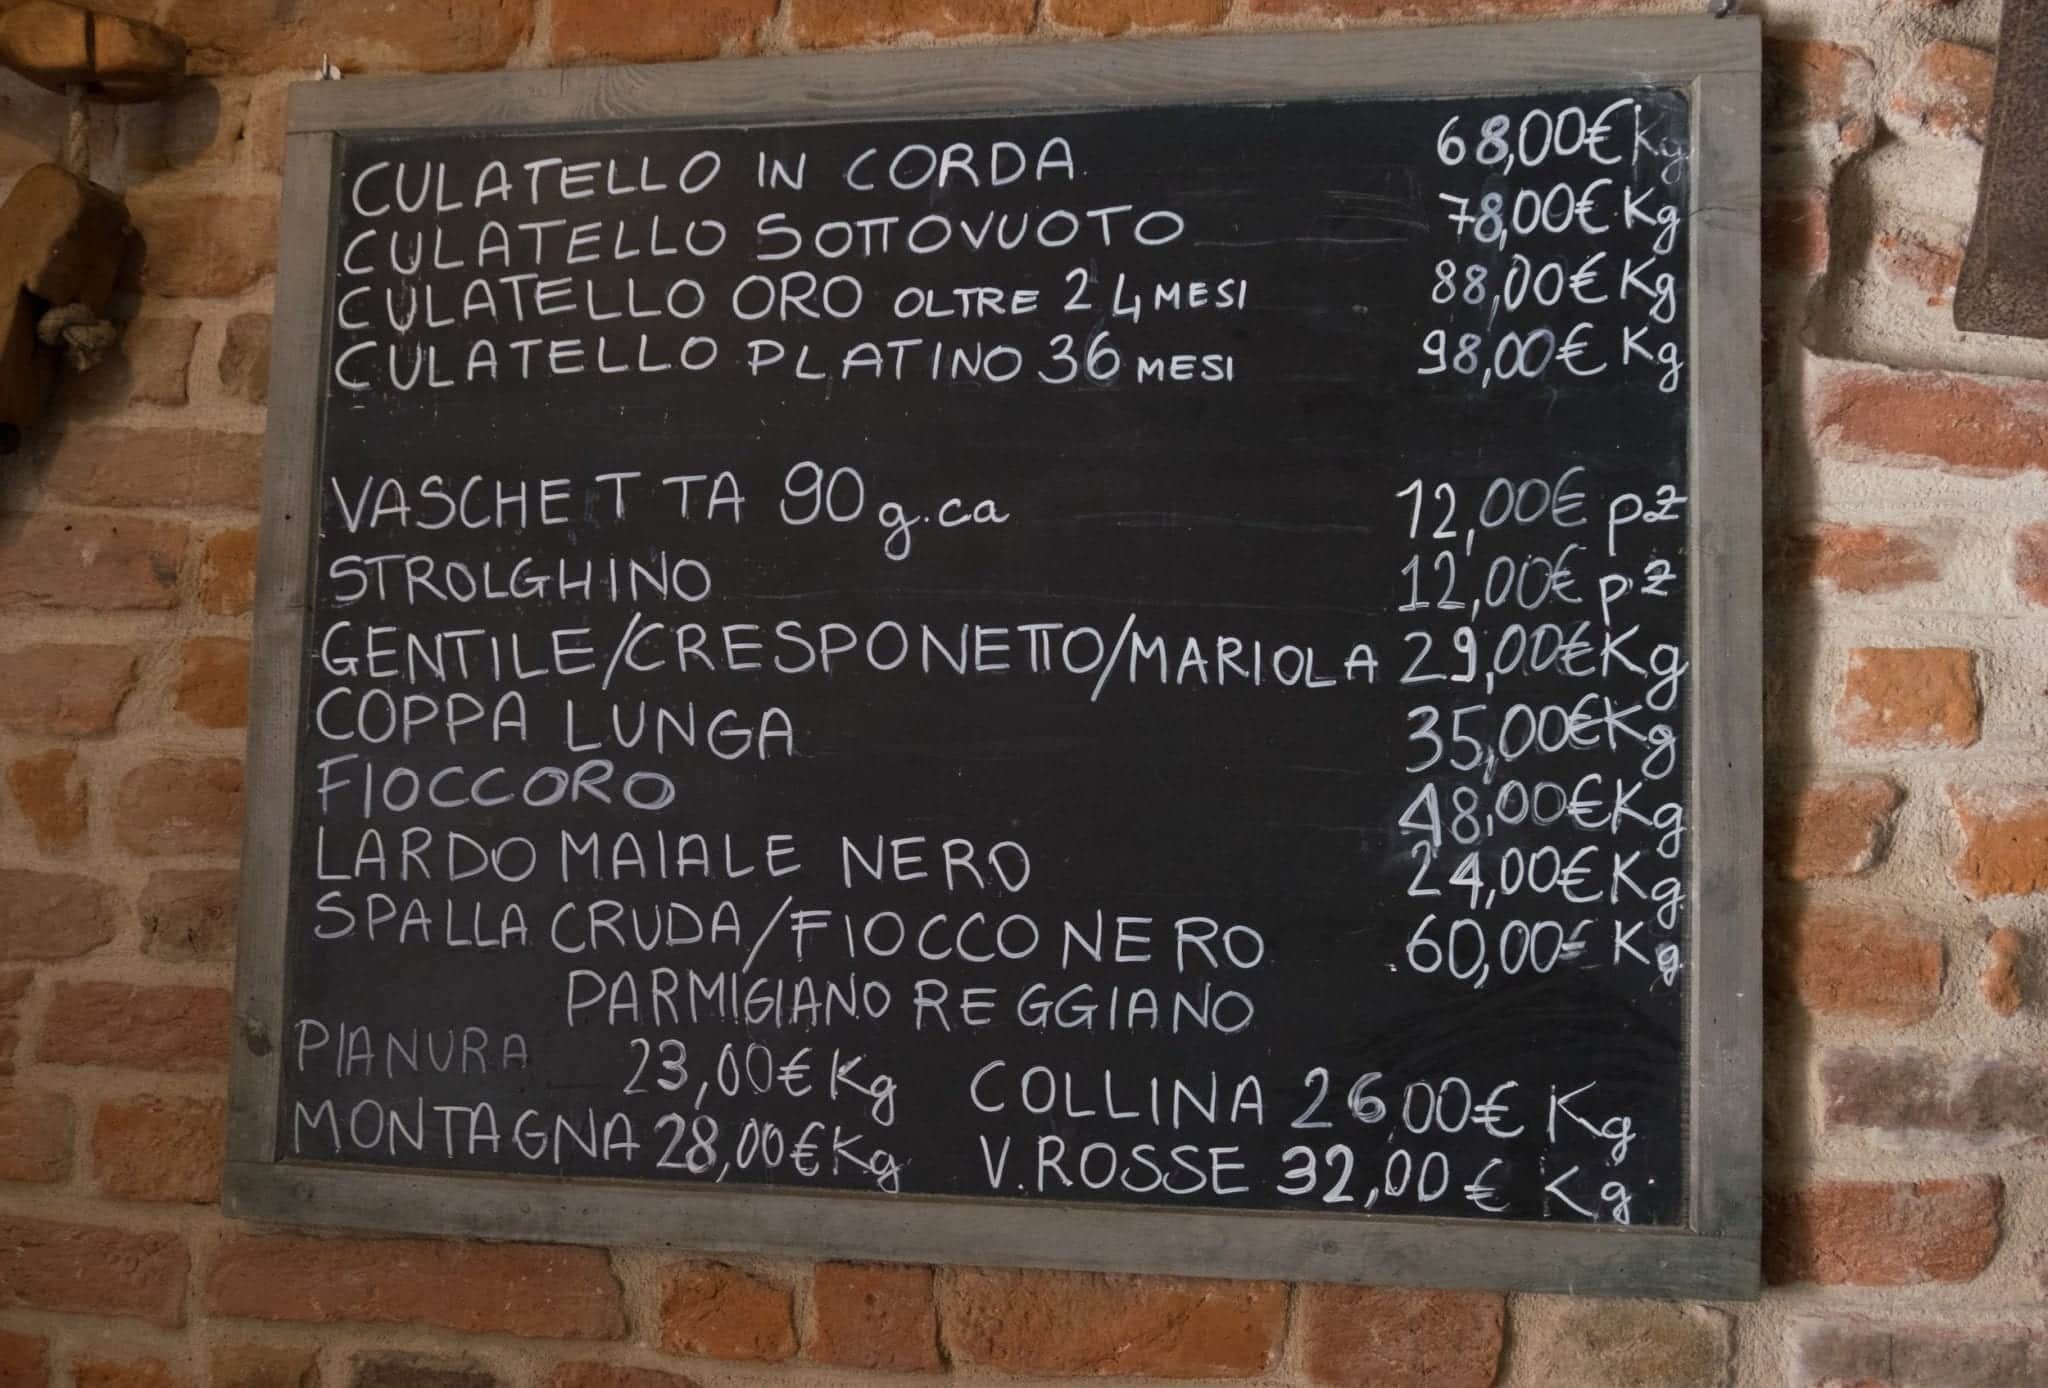 A blackboard with the prices of culatello written on them, starting at 68 euros per kilogram.